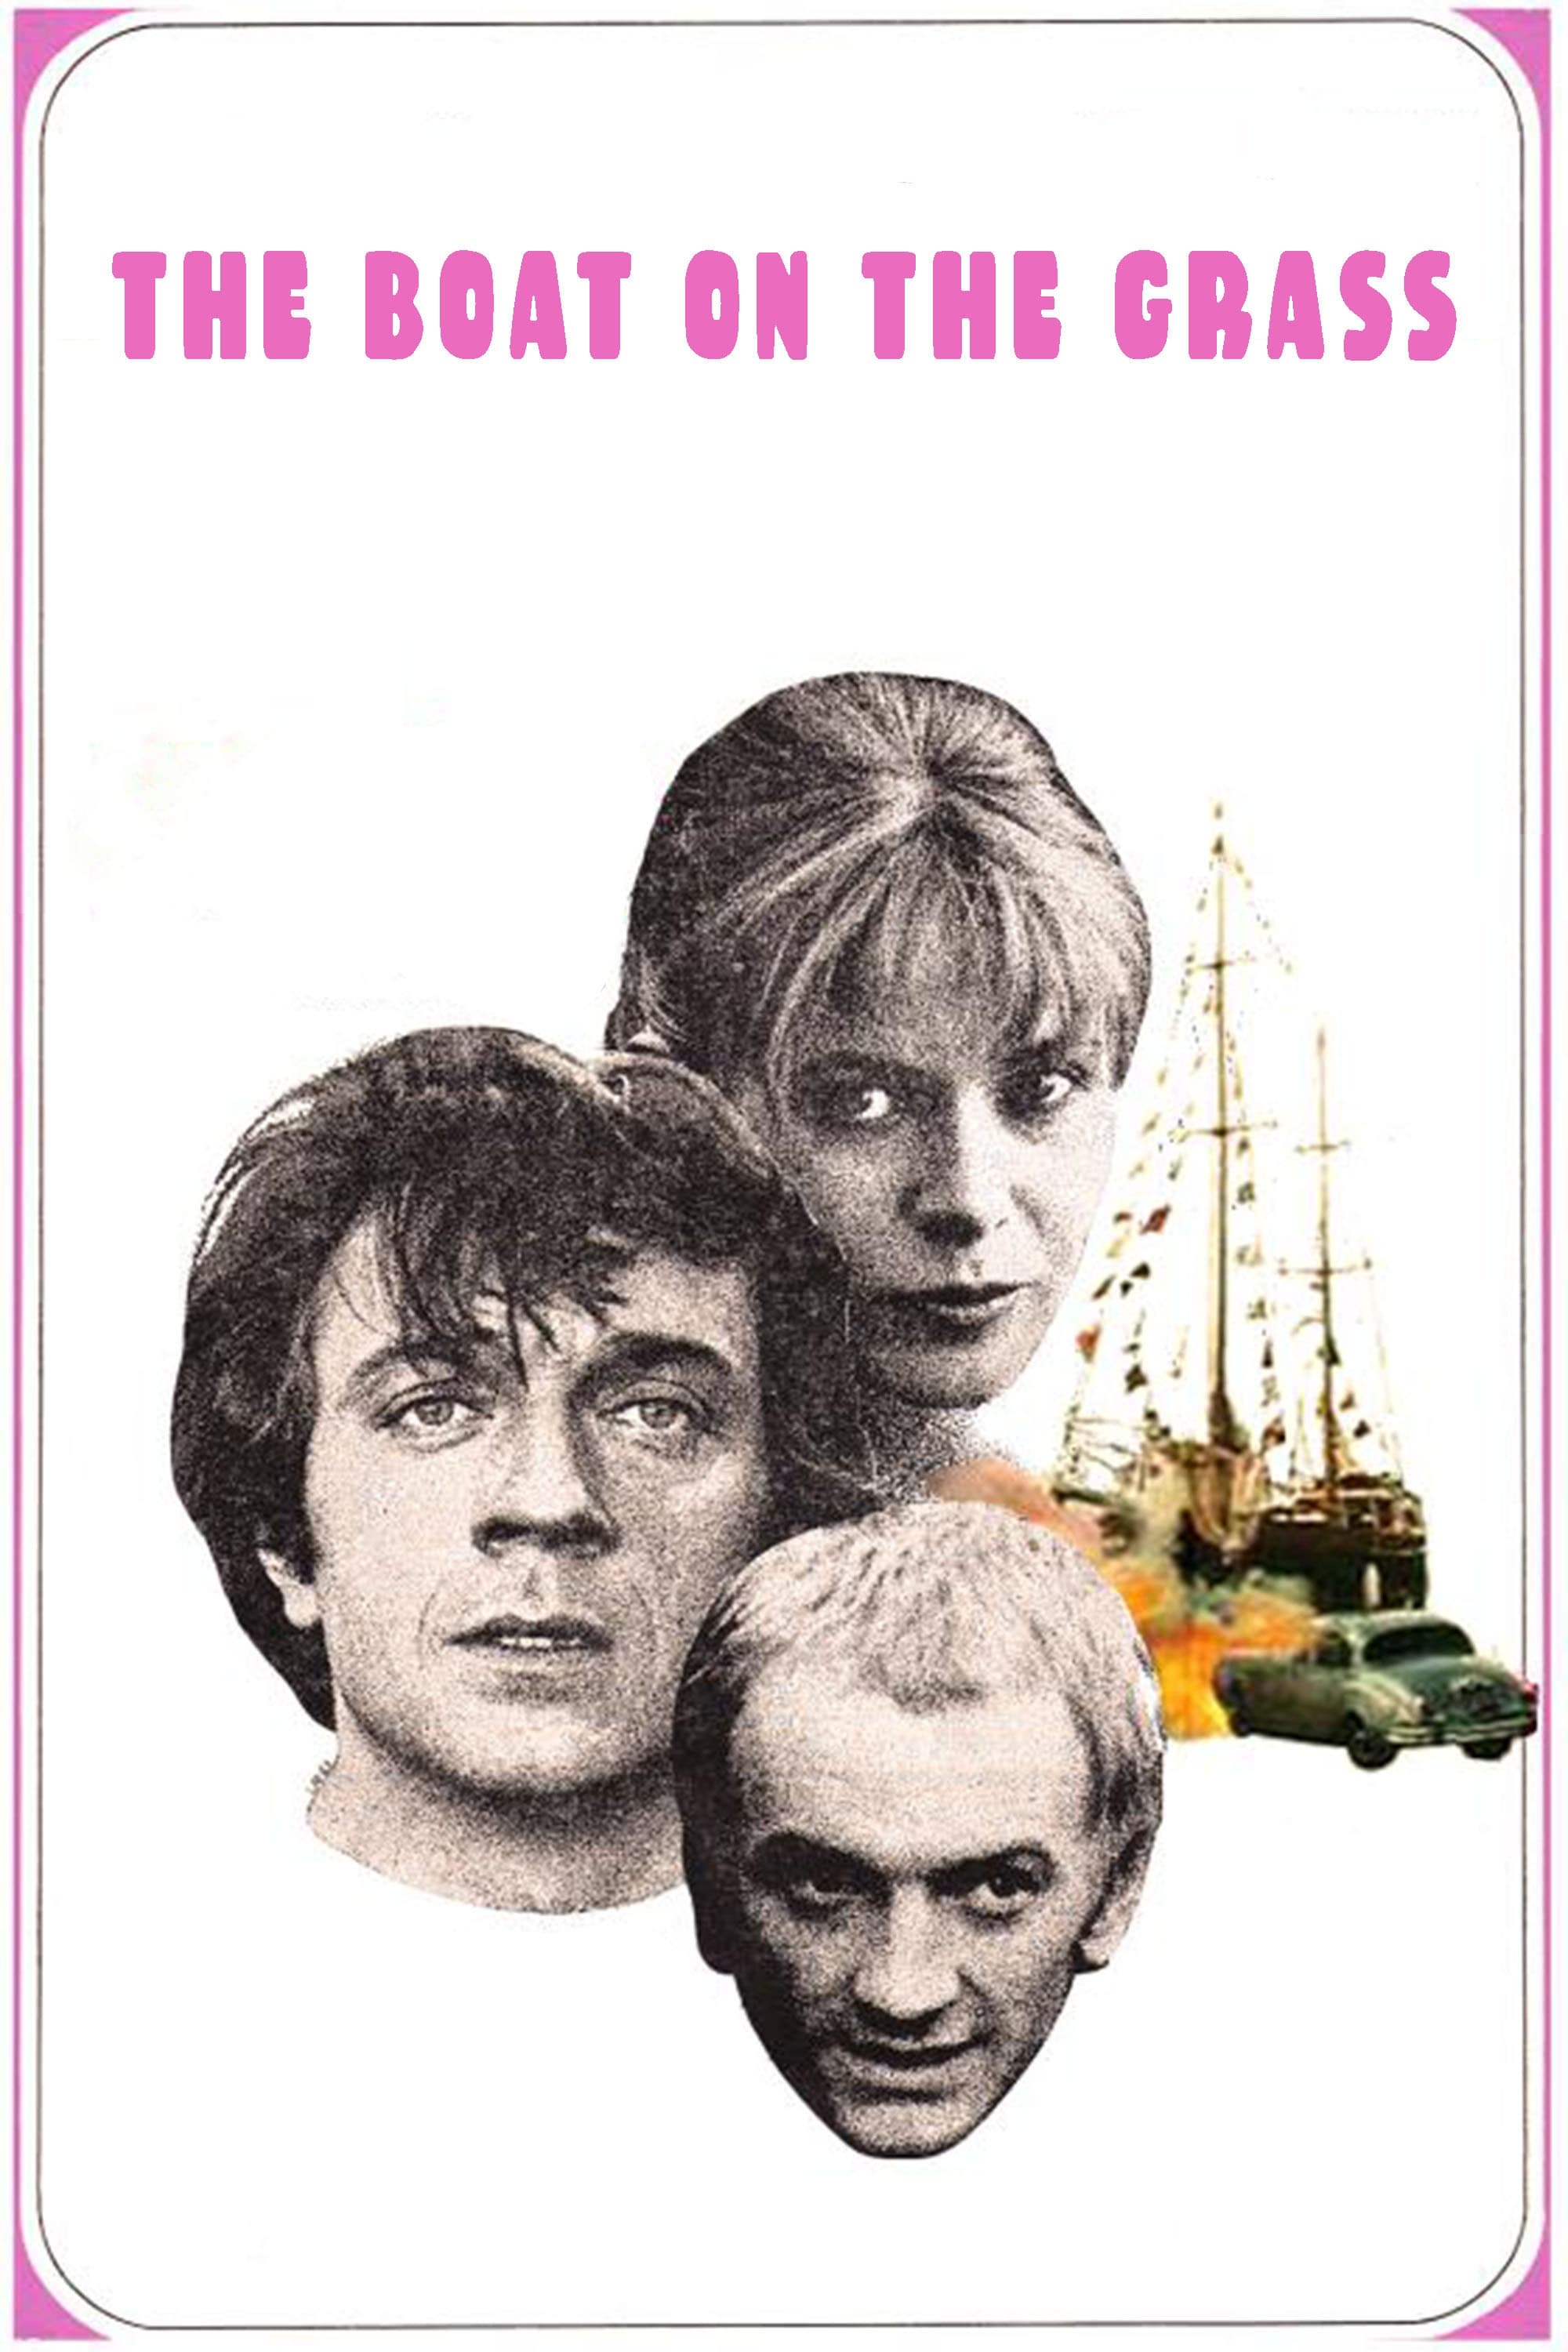 The Boat on the Grass (1971)